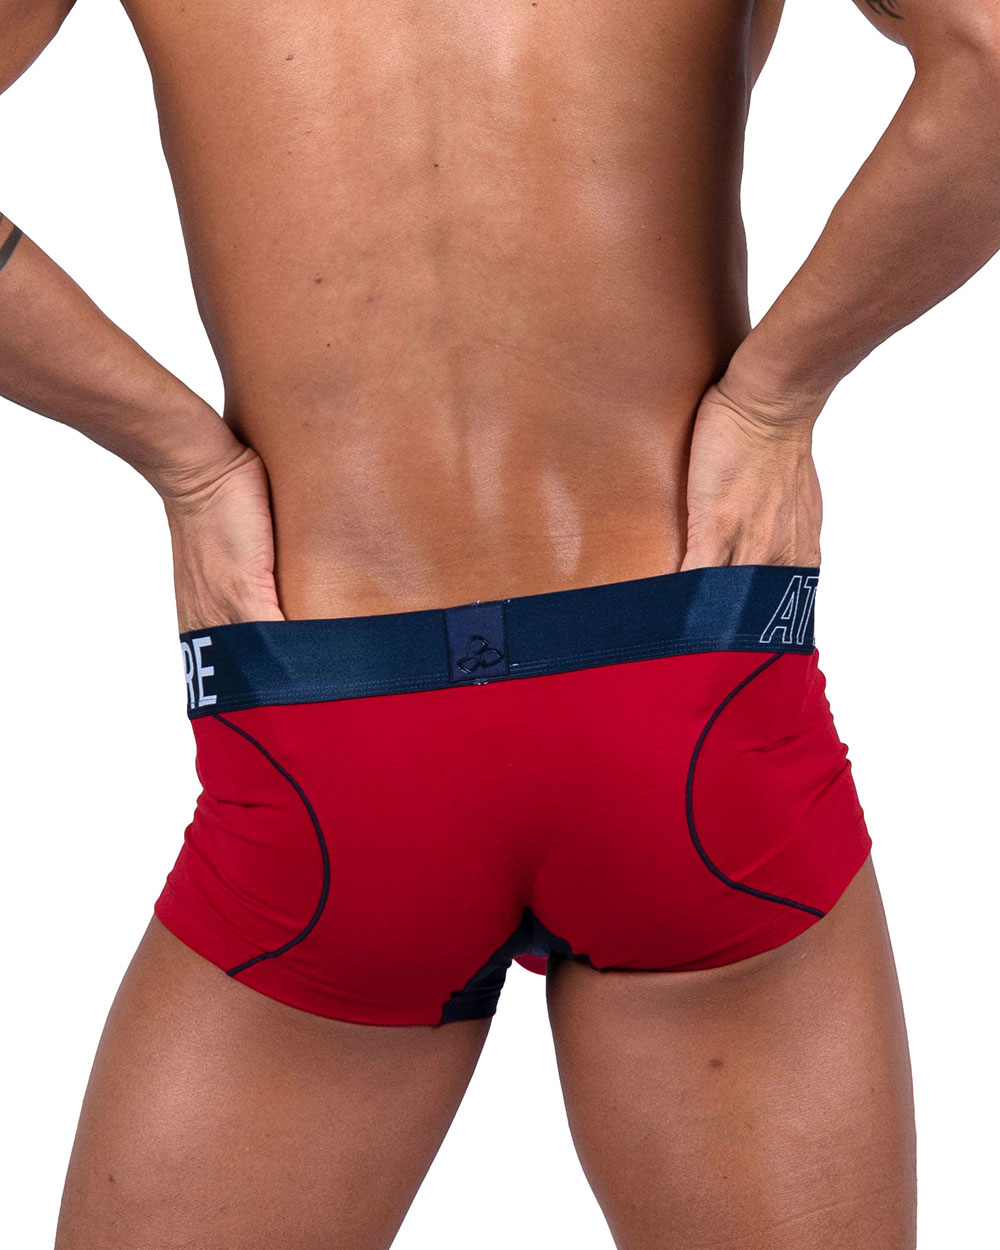 Athlete Trunk - Red Falcon [4389]